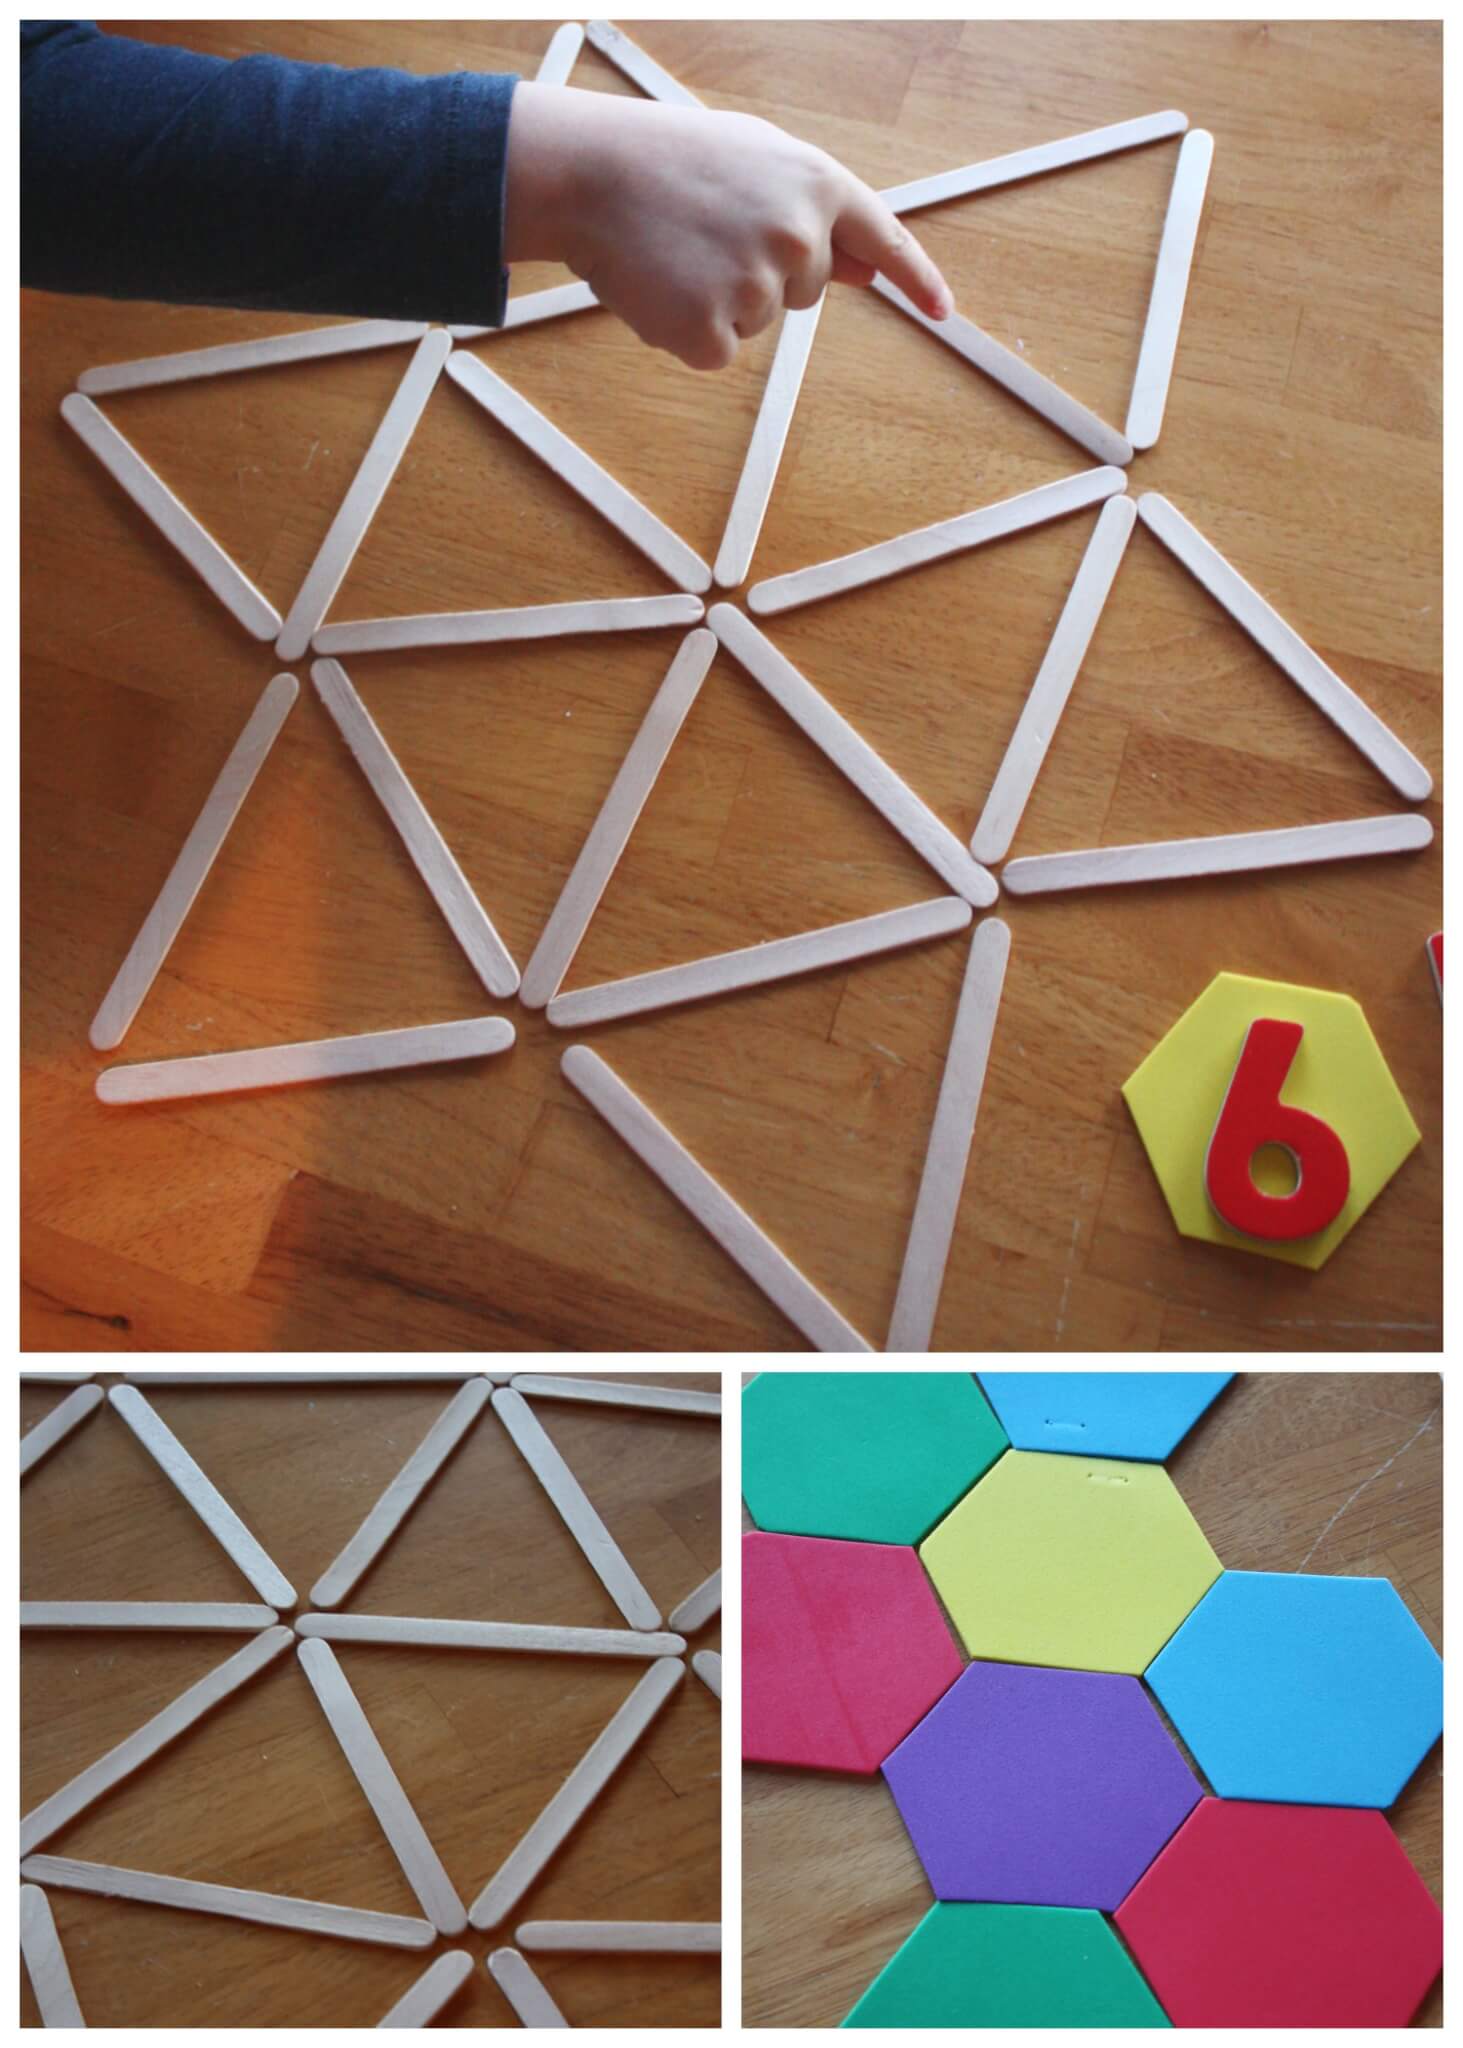 Geometric Shapes Activity Math and STEM Ideas for Kids